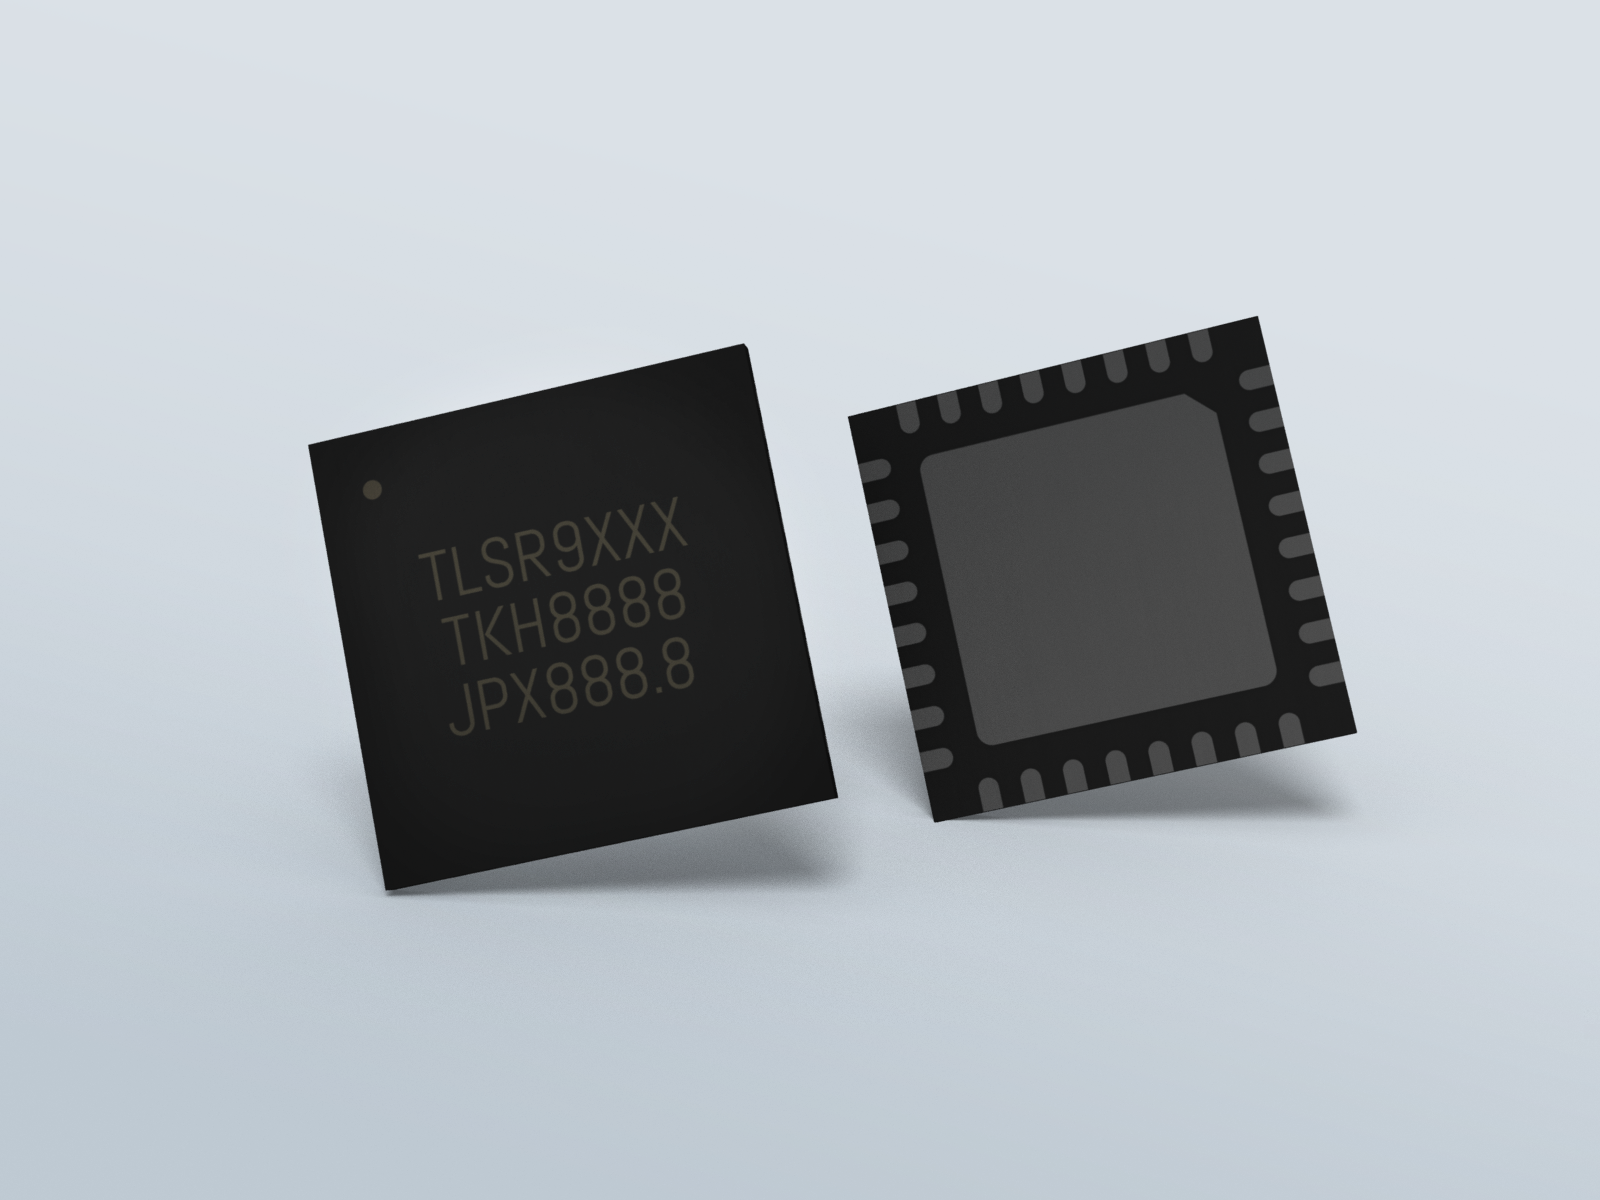 Introducing Telink’s New RISC-V-Based TLSR9 Series | Telink